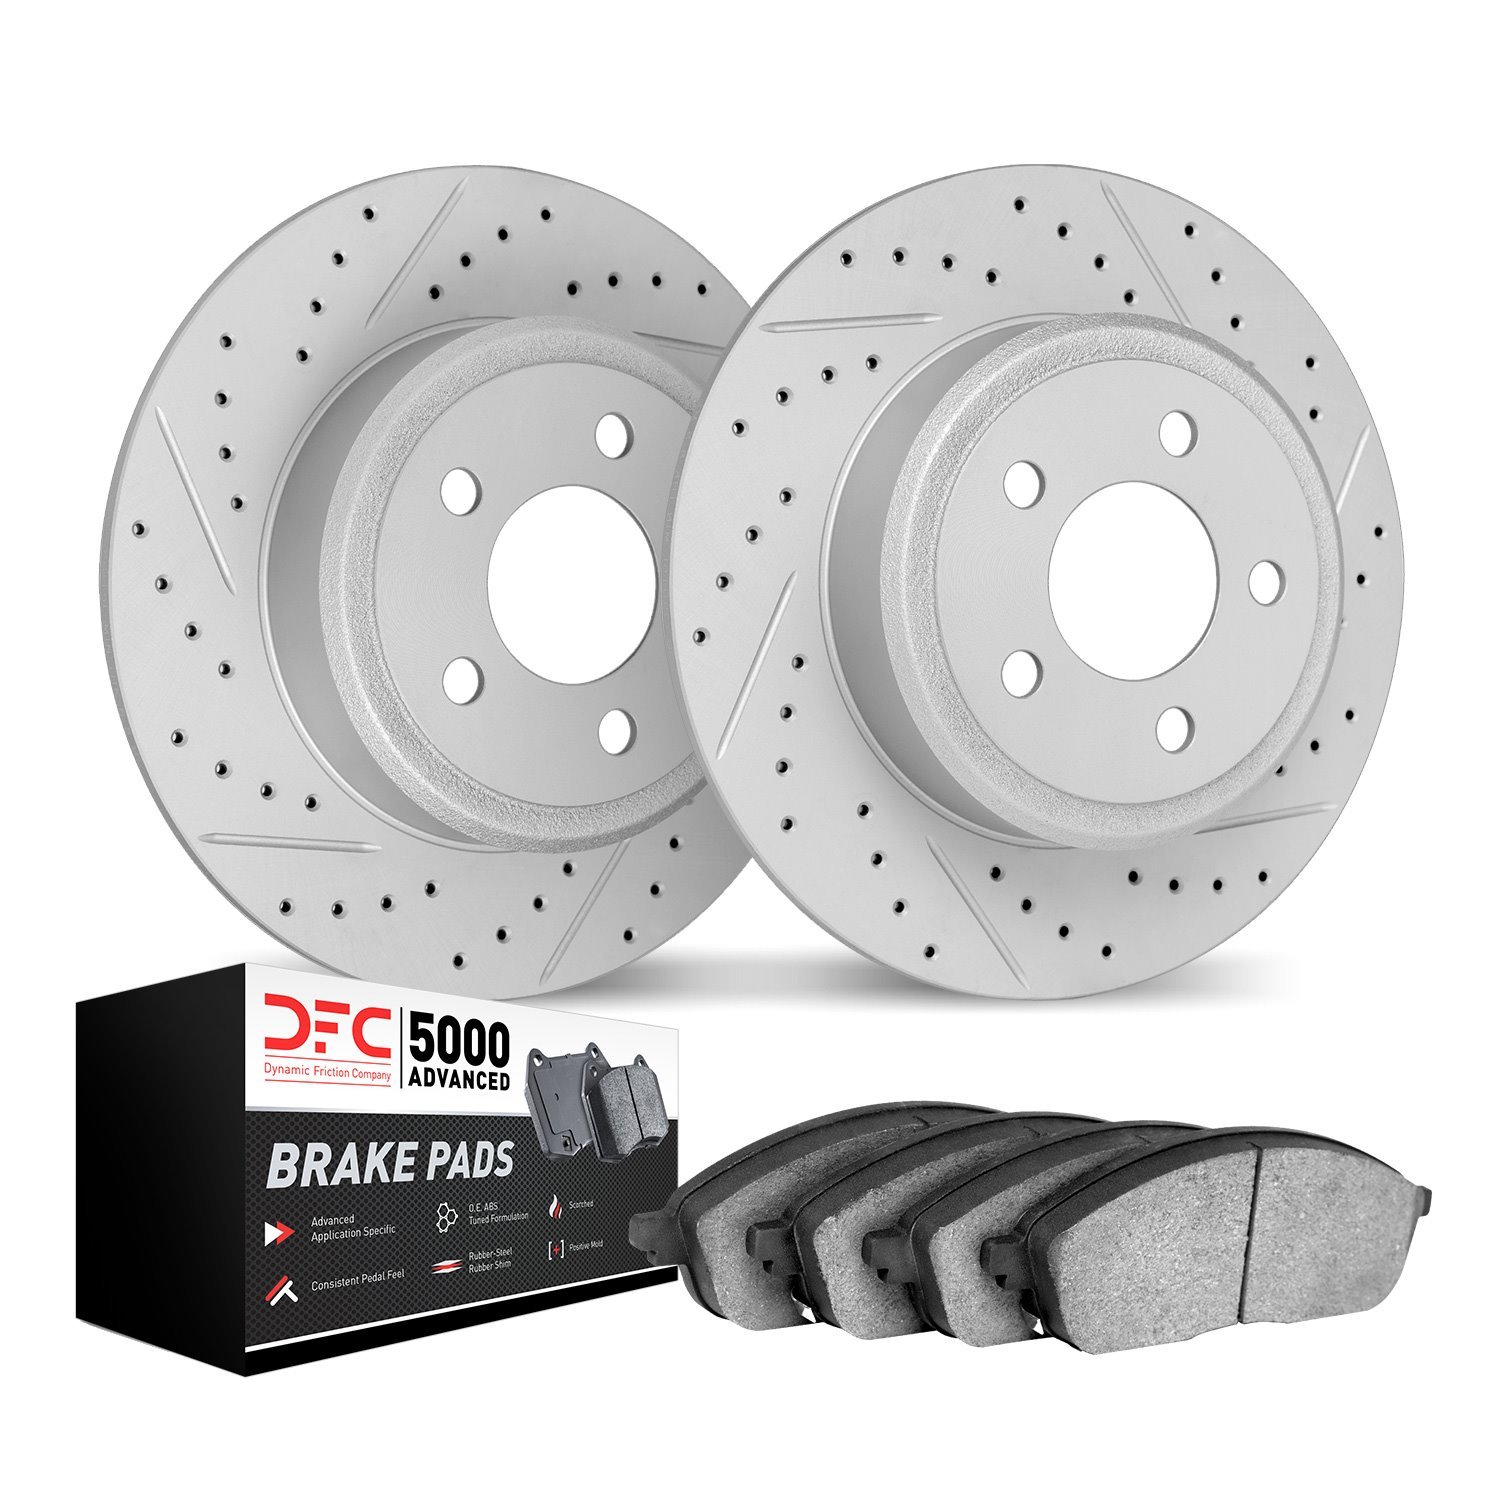 2502-52007 Geoperformance Drilled/Slotted Rotors w/5000 Advanced Brake Pads Kit, 2004-2004 GM, Position: Rear